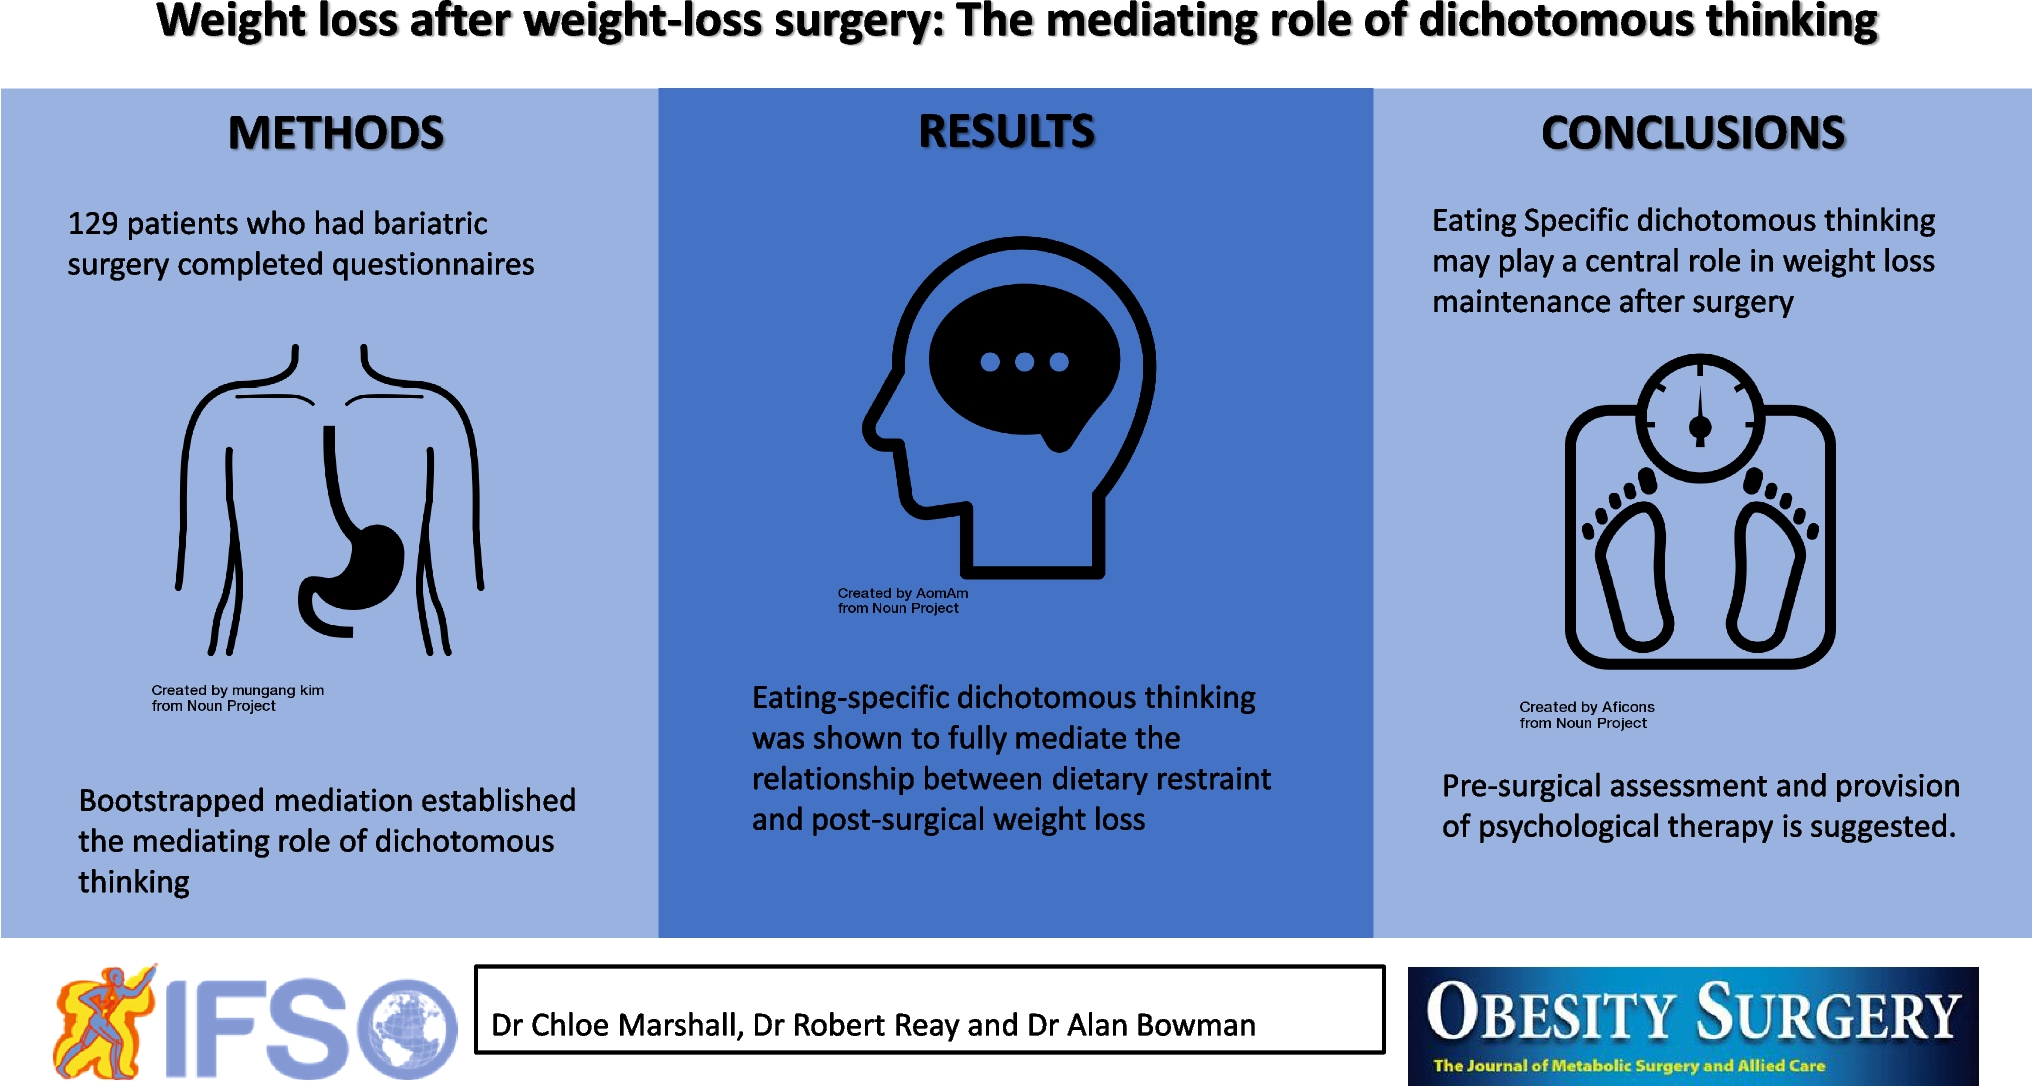 Weight Loss After Weight-Loss Surgery: The Mediating Role of Dichotomous Thinking